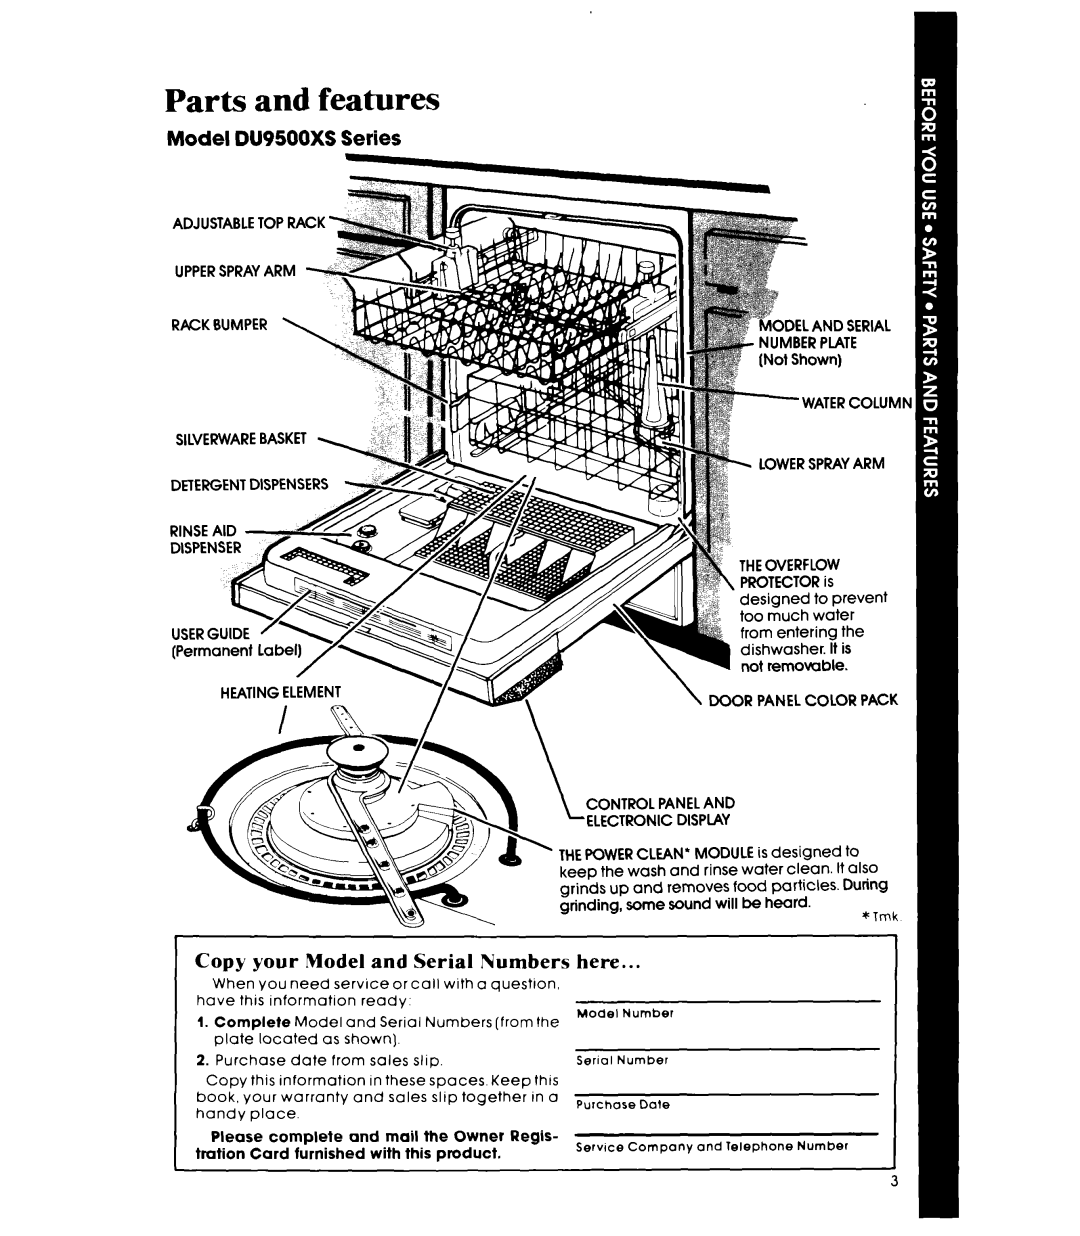 Whirlpool manual Parts and features, Model DU95OOXS Series, Copy your Model and Serial Numbers, here 